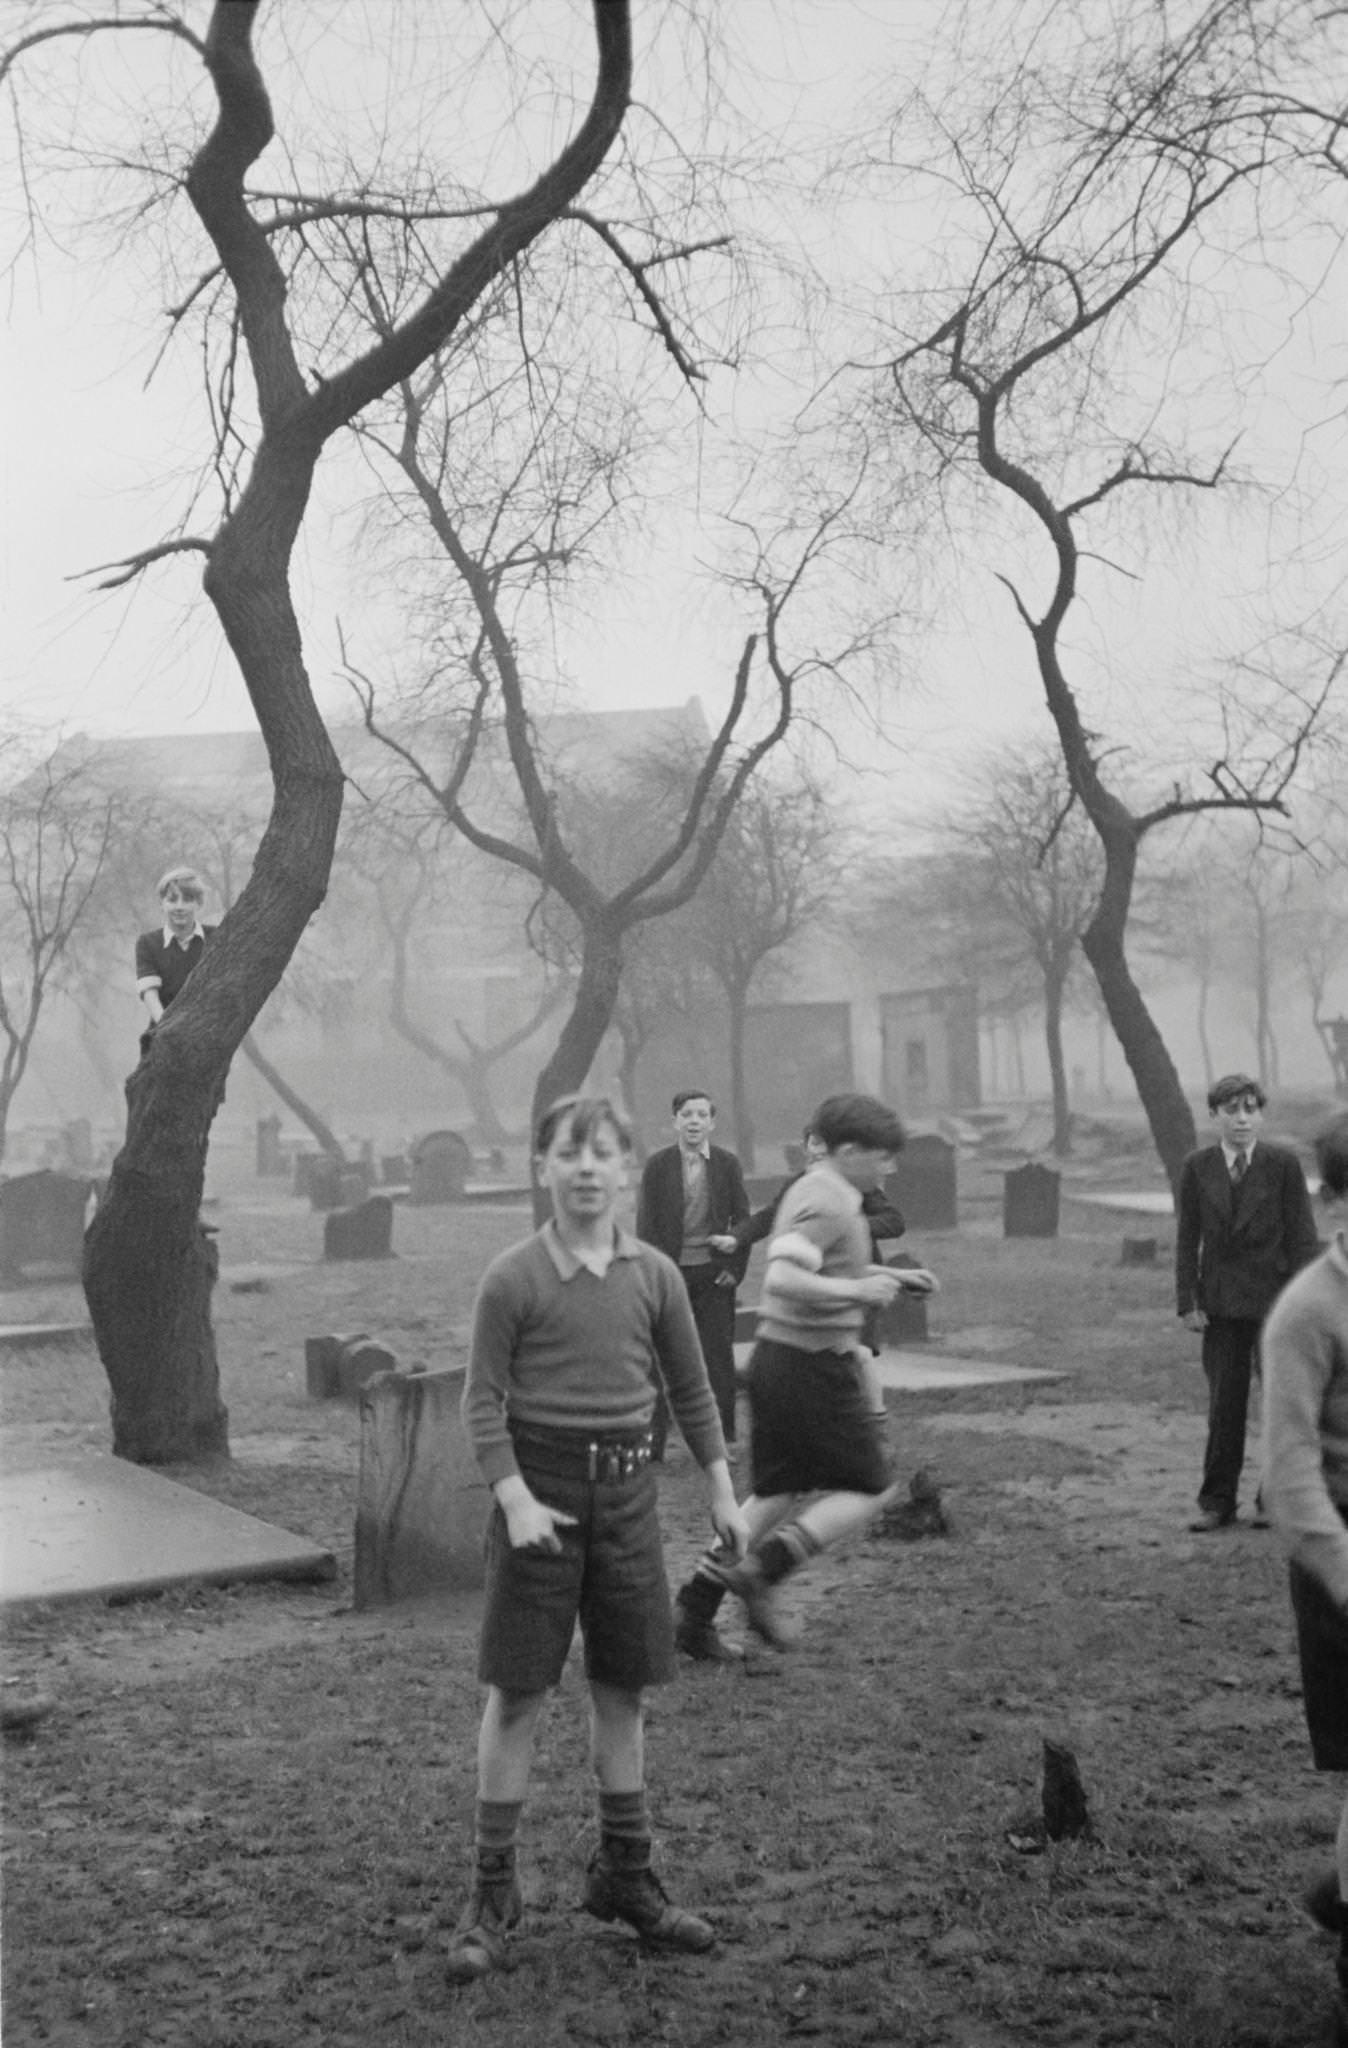 A group of boys play amongst the gravestones of the Corporation Burial Ground in Rutherglen Road, one of the few areas of greenery in the Gorbals, a slum district of Glasgow, 1948.